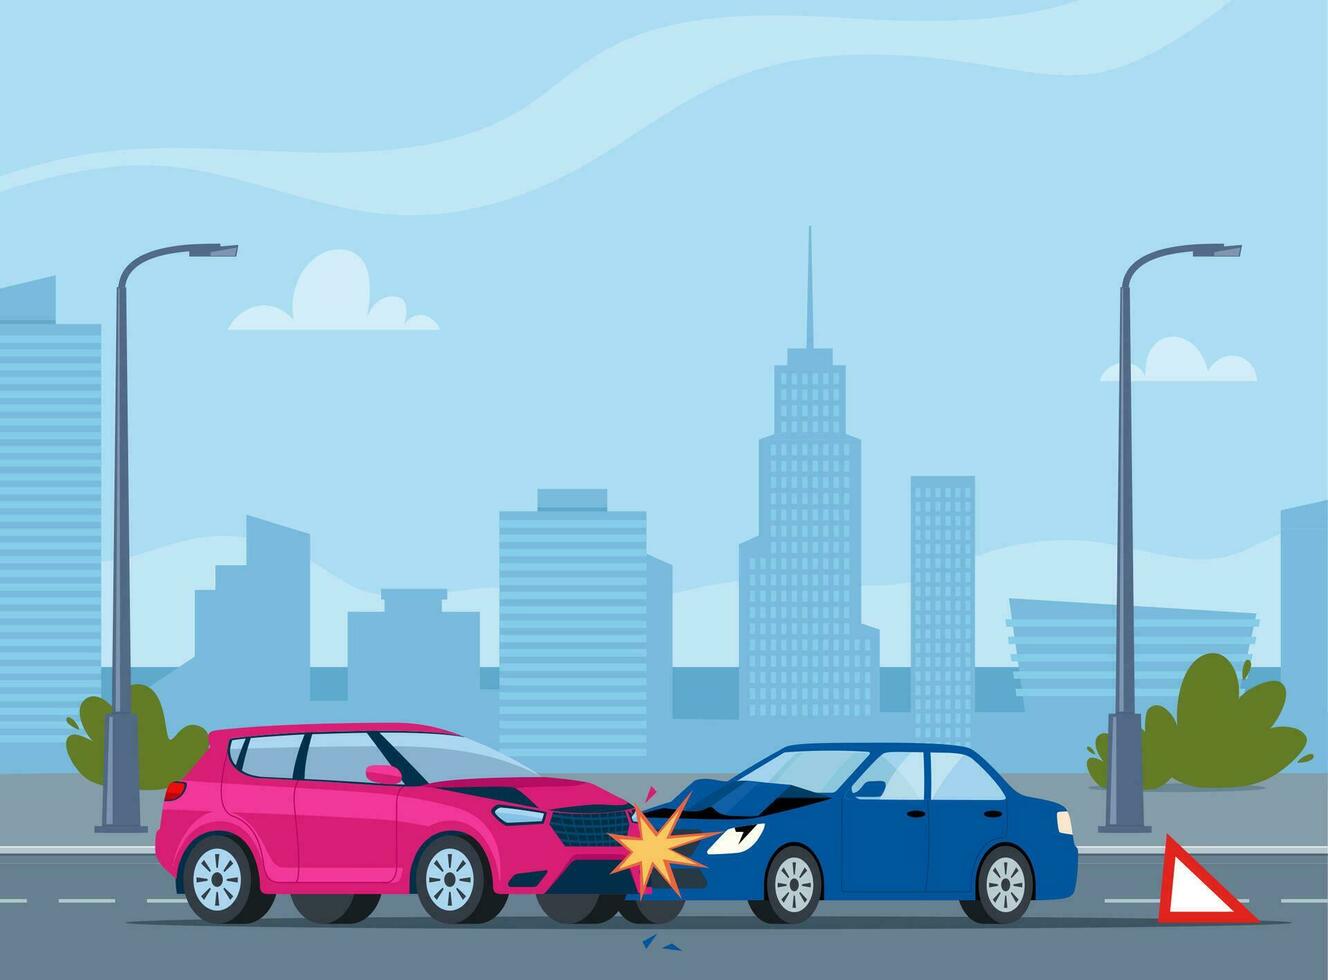 Car accident. Damaged transport on the road. Collision of two cars on city street. Damaged transport. Safety of driving personal vehicles, car insurance. Vector illustration.